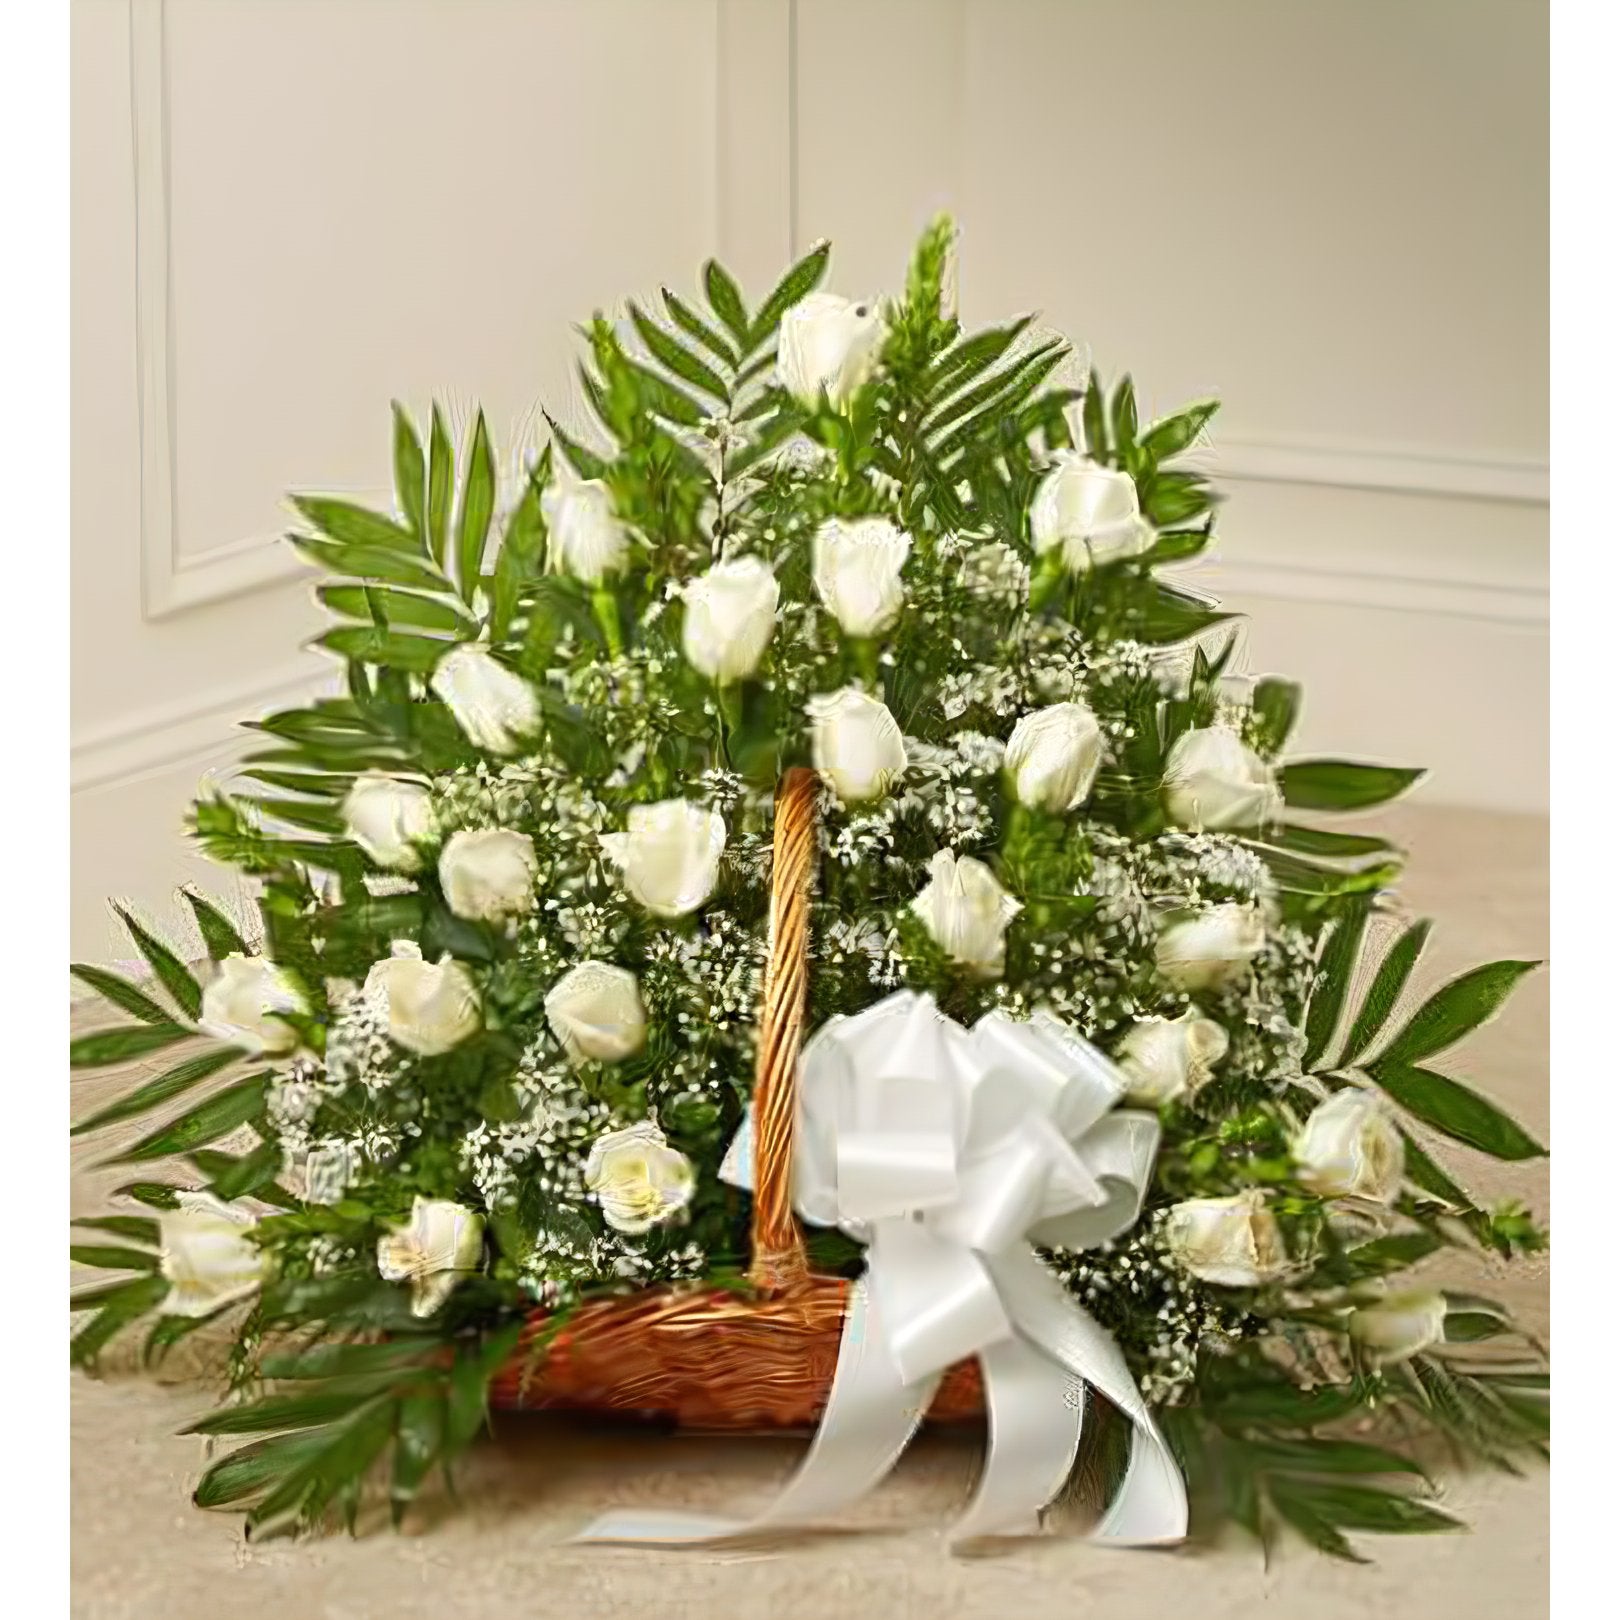 Sincerest Sympathies Fireside Basket - White - Funeral > For the Service - Queens Flower Delivery